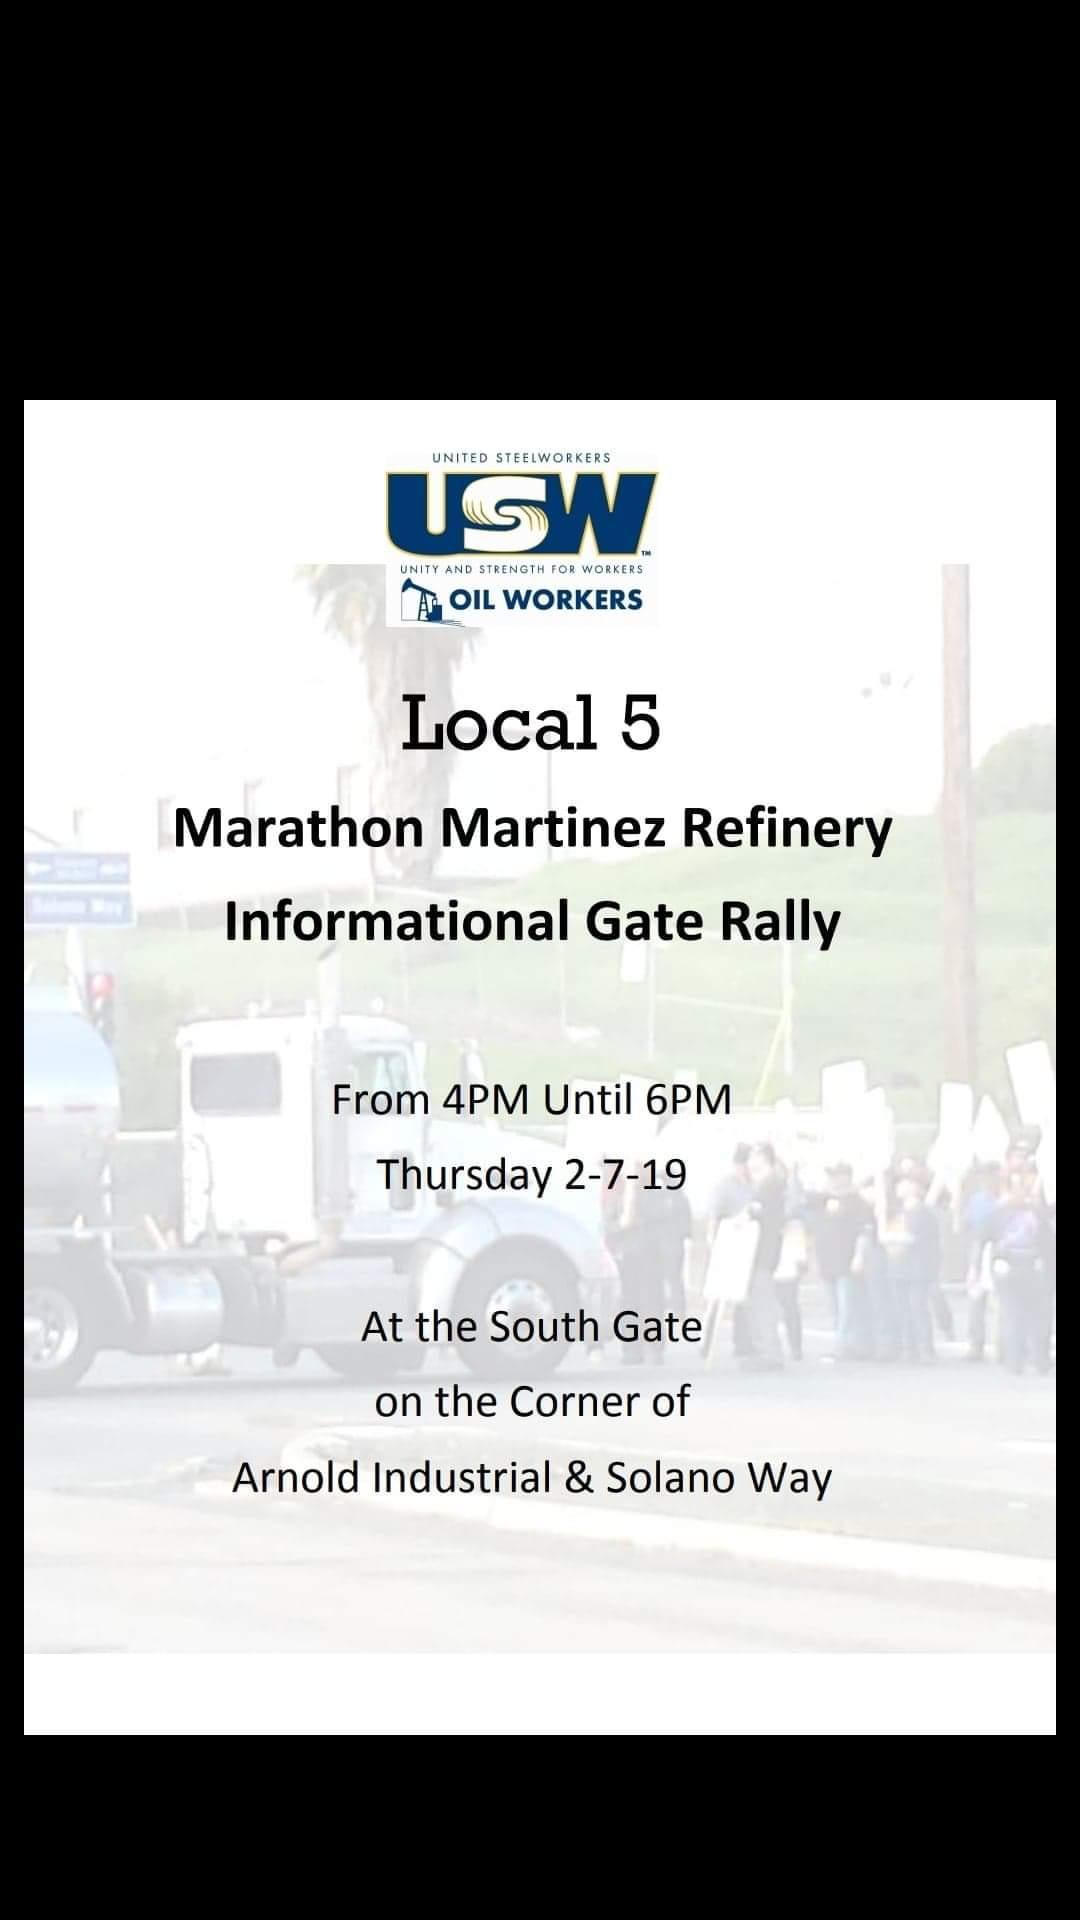 Local 5 Informational Gate